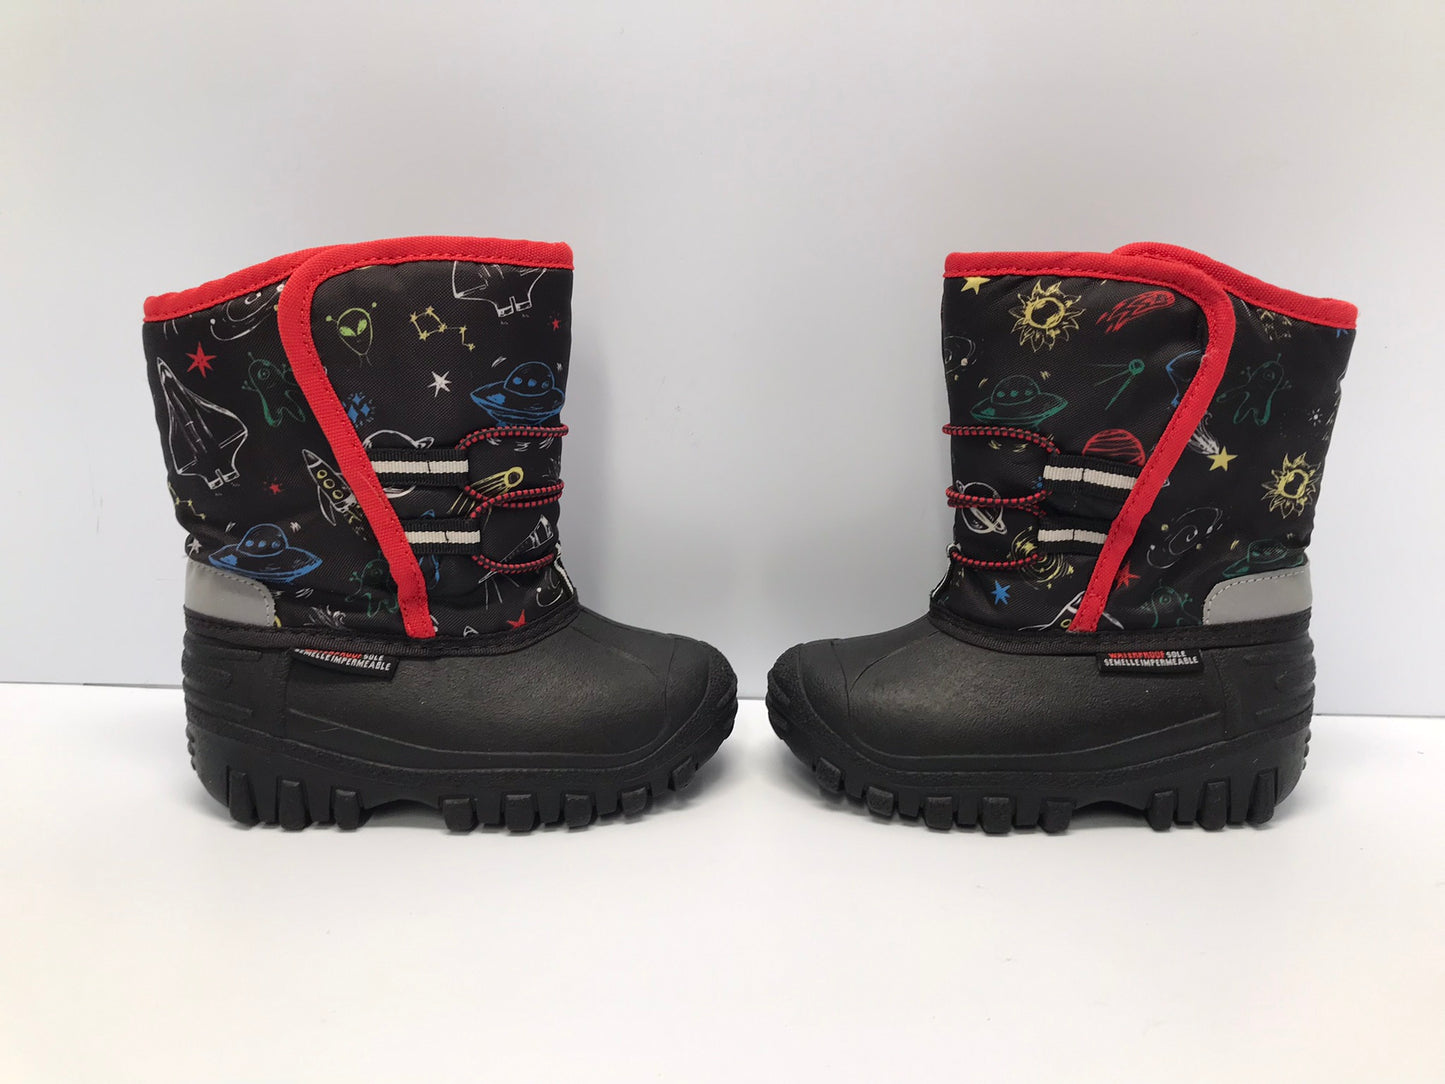 Winter Boots Child Size 10 Shoe Size Canadian Waterproof Black Red As New